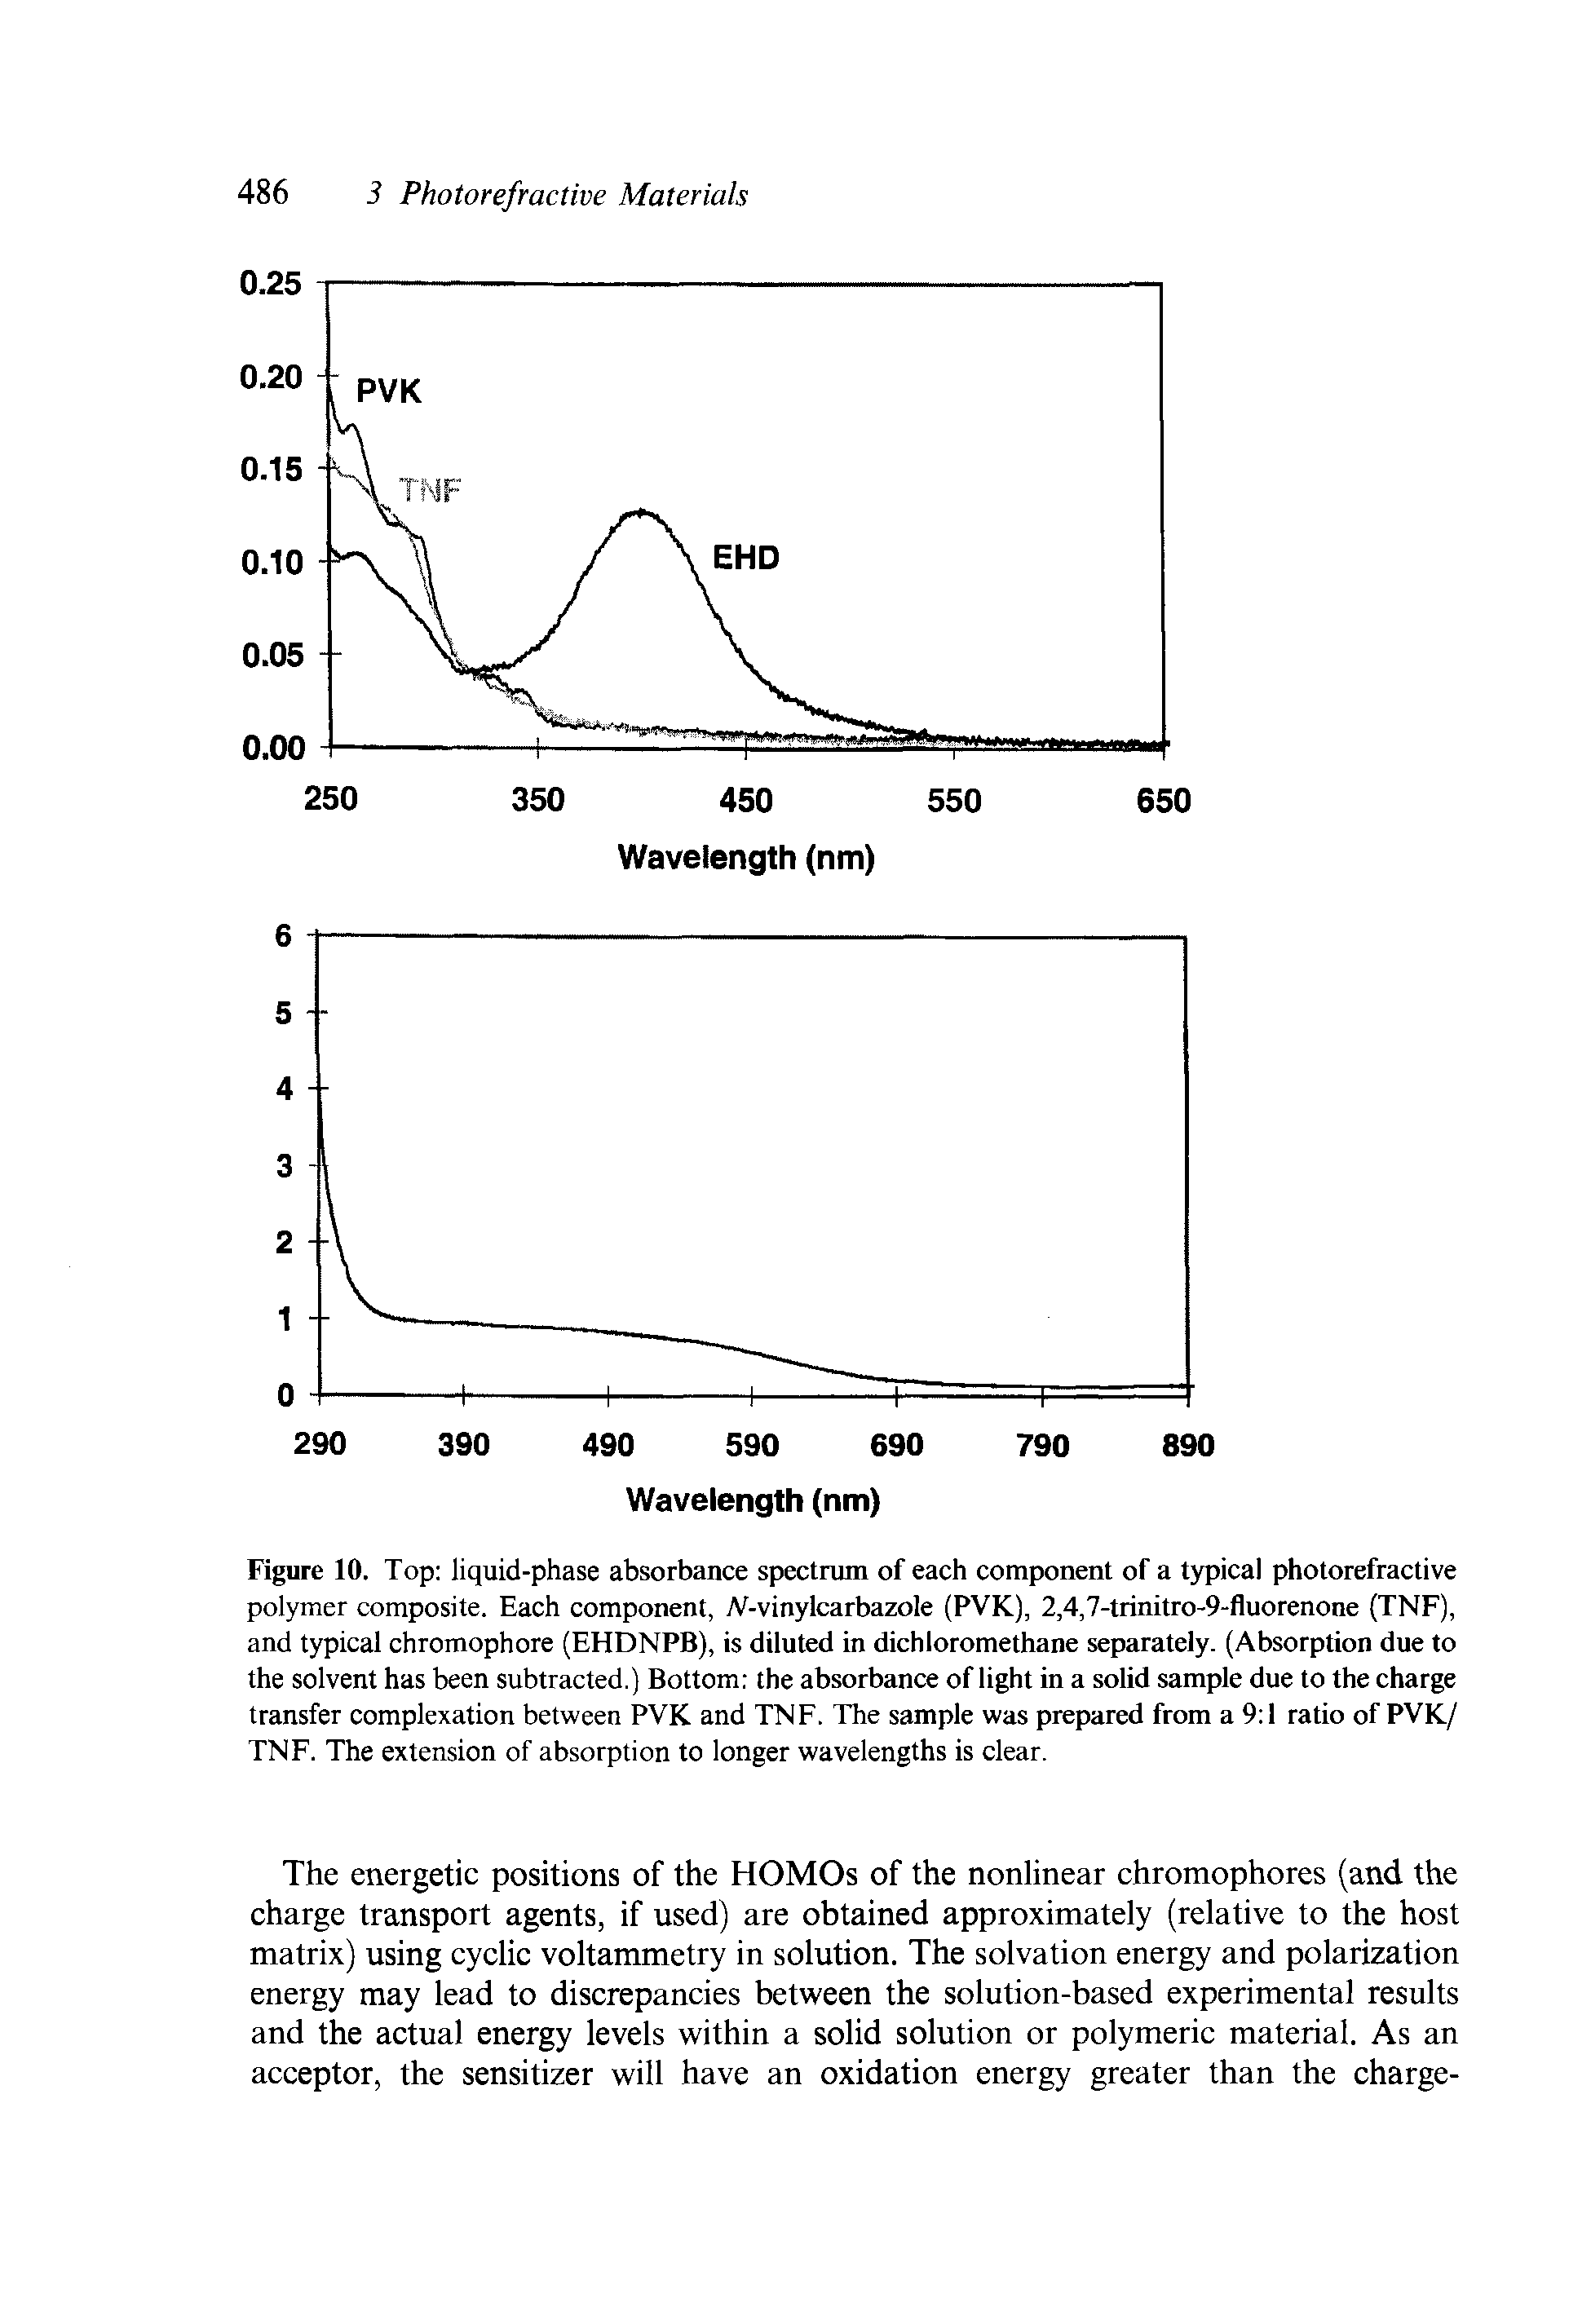 Figure 10. Top liquid-phase absorbance spectrum of each component of a typical photorefractive polymer composite. Each component, A -vinylcarbazole (PVK), 2,4,7-trinitro-9-fluorenone (TNF), and typical chromophore (EHDNPB), is diluted in dichloromethane separately. (Absorption due to the solvent has been subtracted.) Bottom the absorbance of light in a solid sample due to the charge transfer complexation between PVK and TNF. The sample was prepared from a 9 1 ratio of PVK/ TNF. The extension of absorption to longer wavelengths is clear.